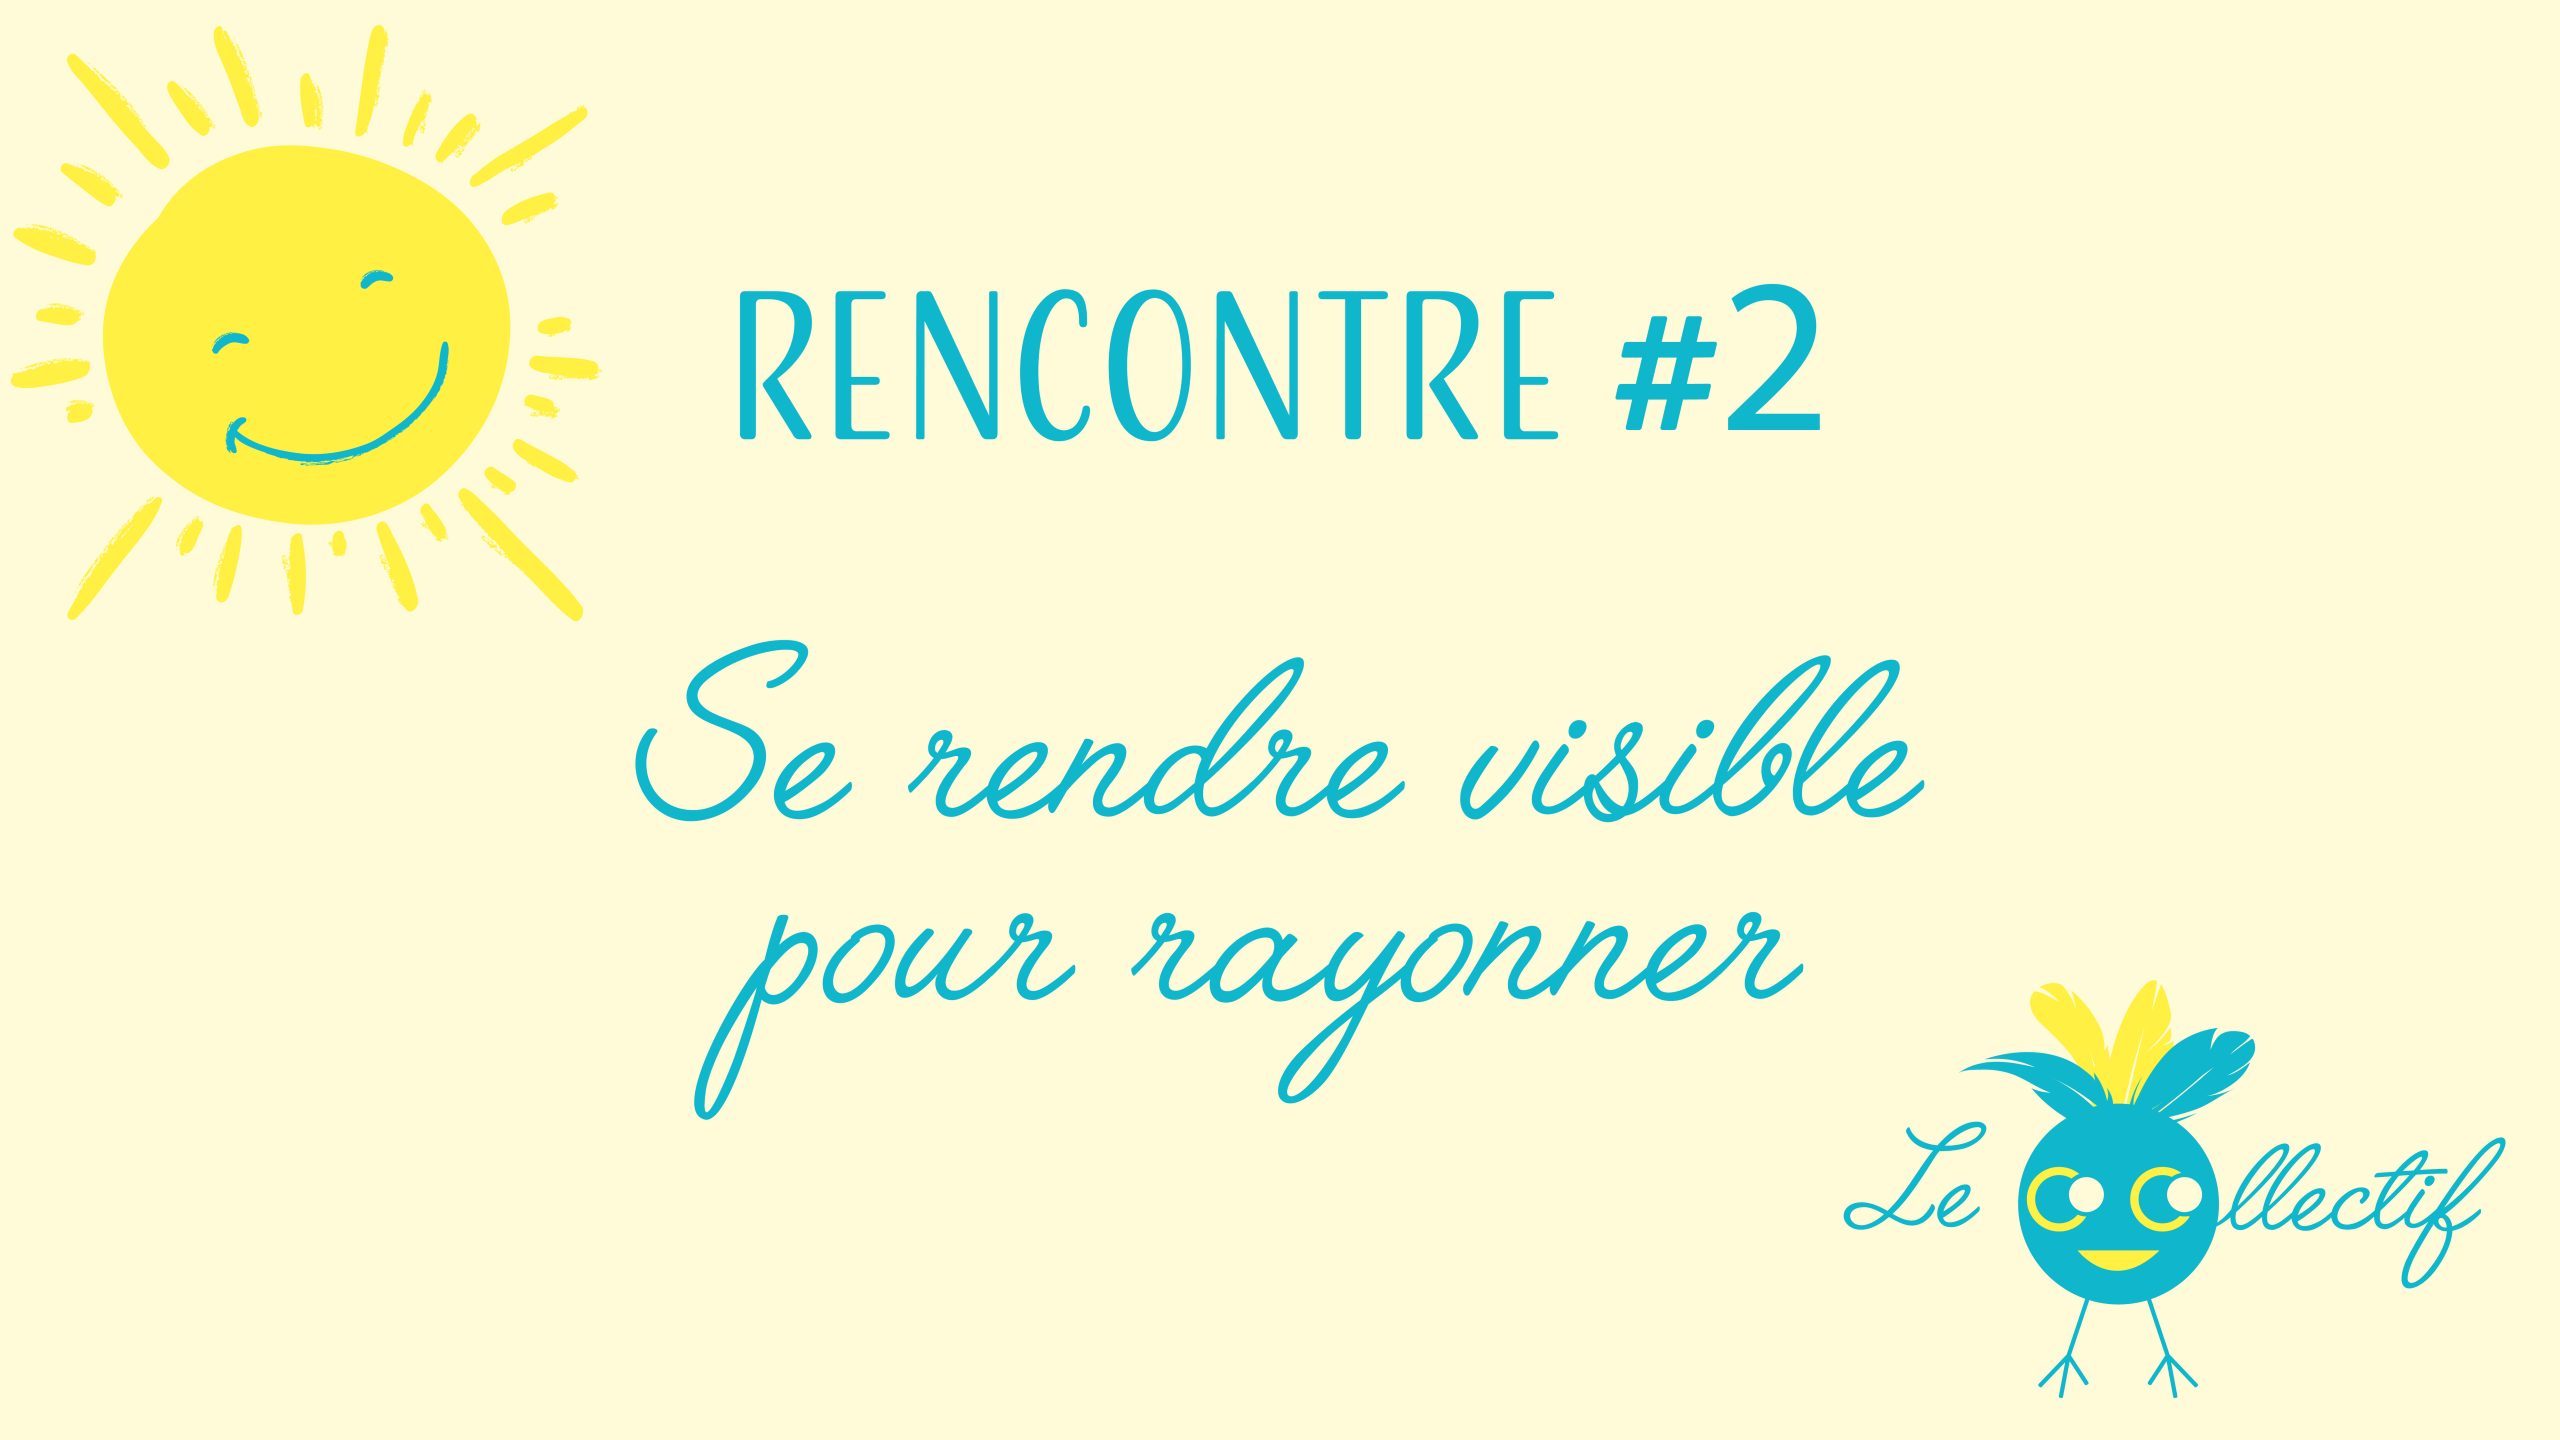 rencontre co-collectif #2 : se rendre visible pour rayonner 7 rencontre2 facebook v scaled